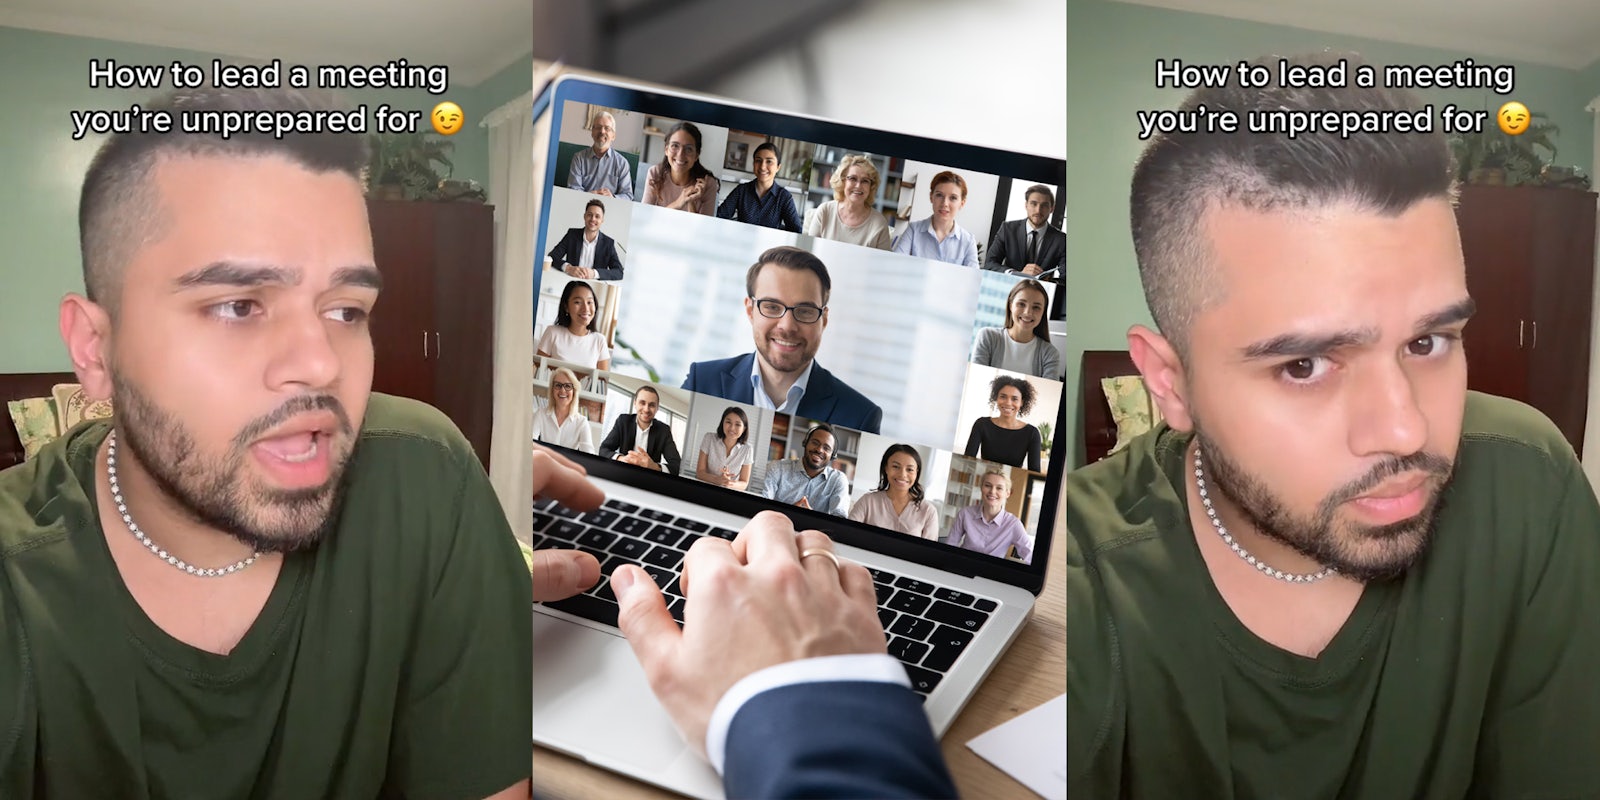 worker speaking with caption 'How to lead a meeting you're unprepared for' (l) worker speaking for online work meeting (c) worker speaking with caption 'How to lead a meeting you're unprepared for' (r)